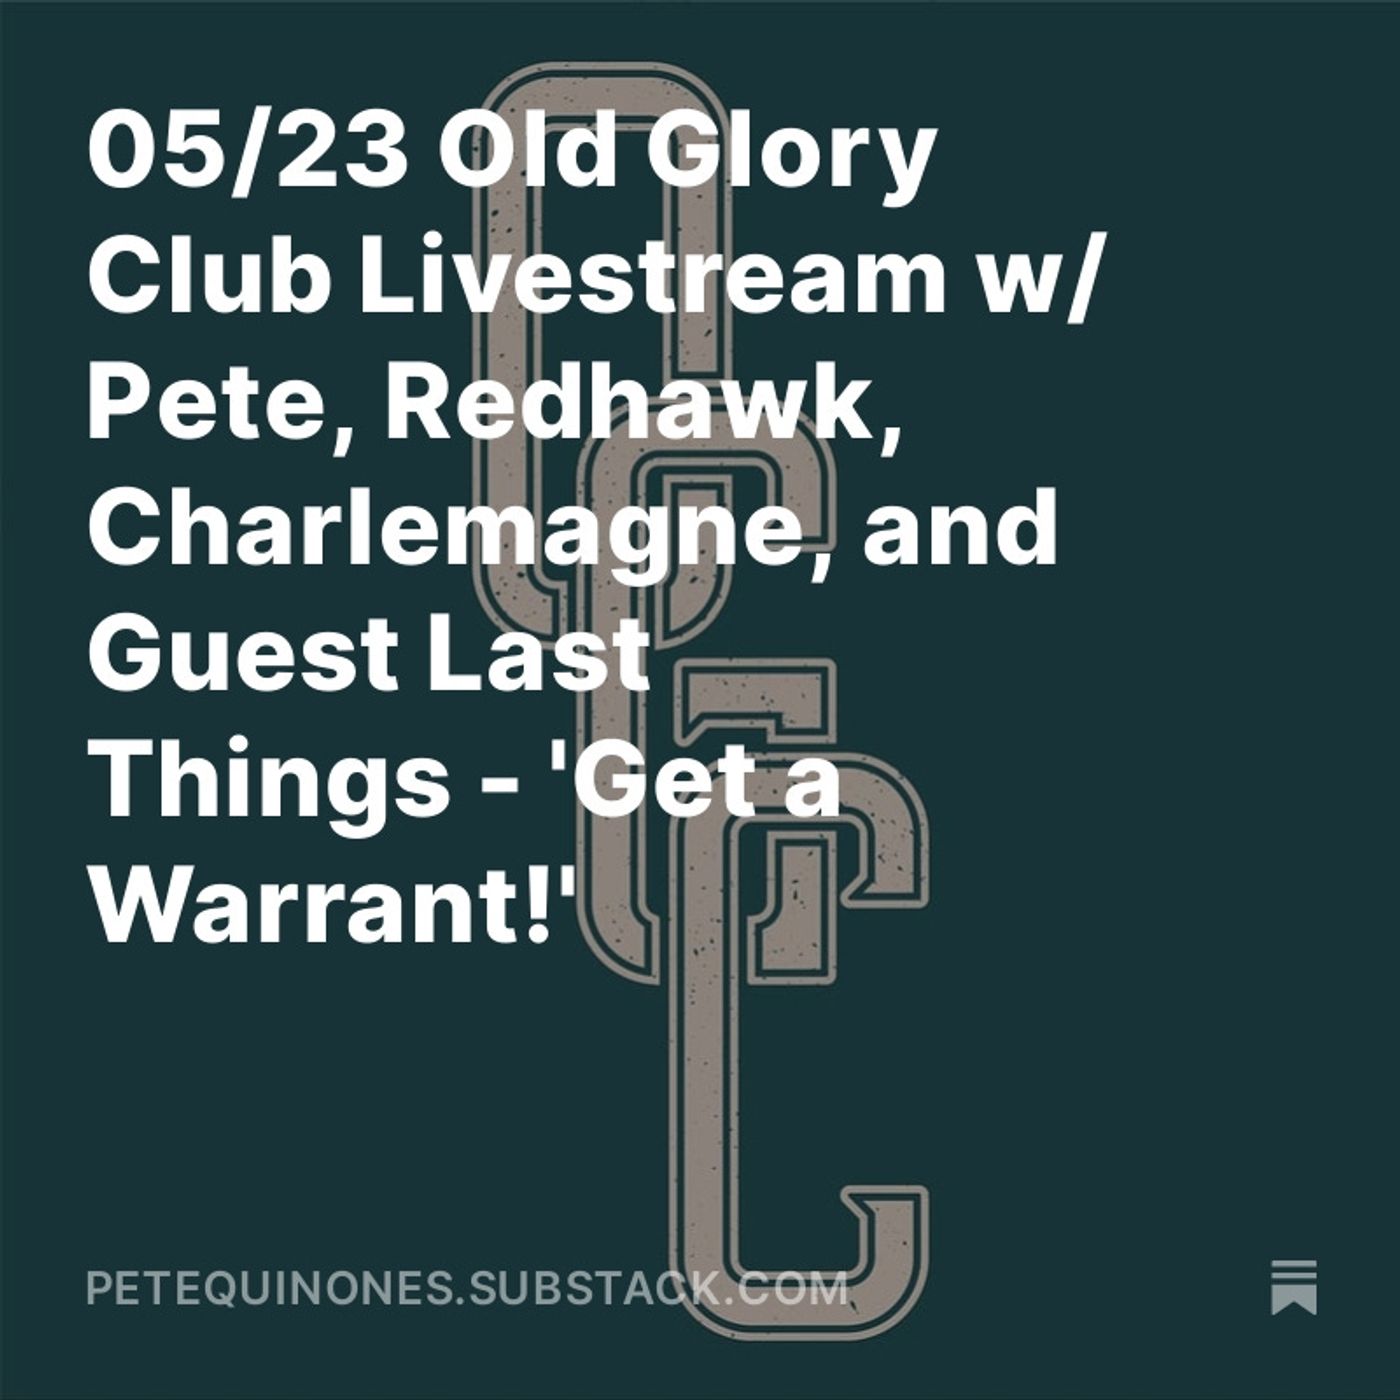 05/23 Old Glory Club Livestream w/ Pete, Redhawk, Charlemagne, and Guest Last Things - 'Get a Warrant!'